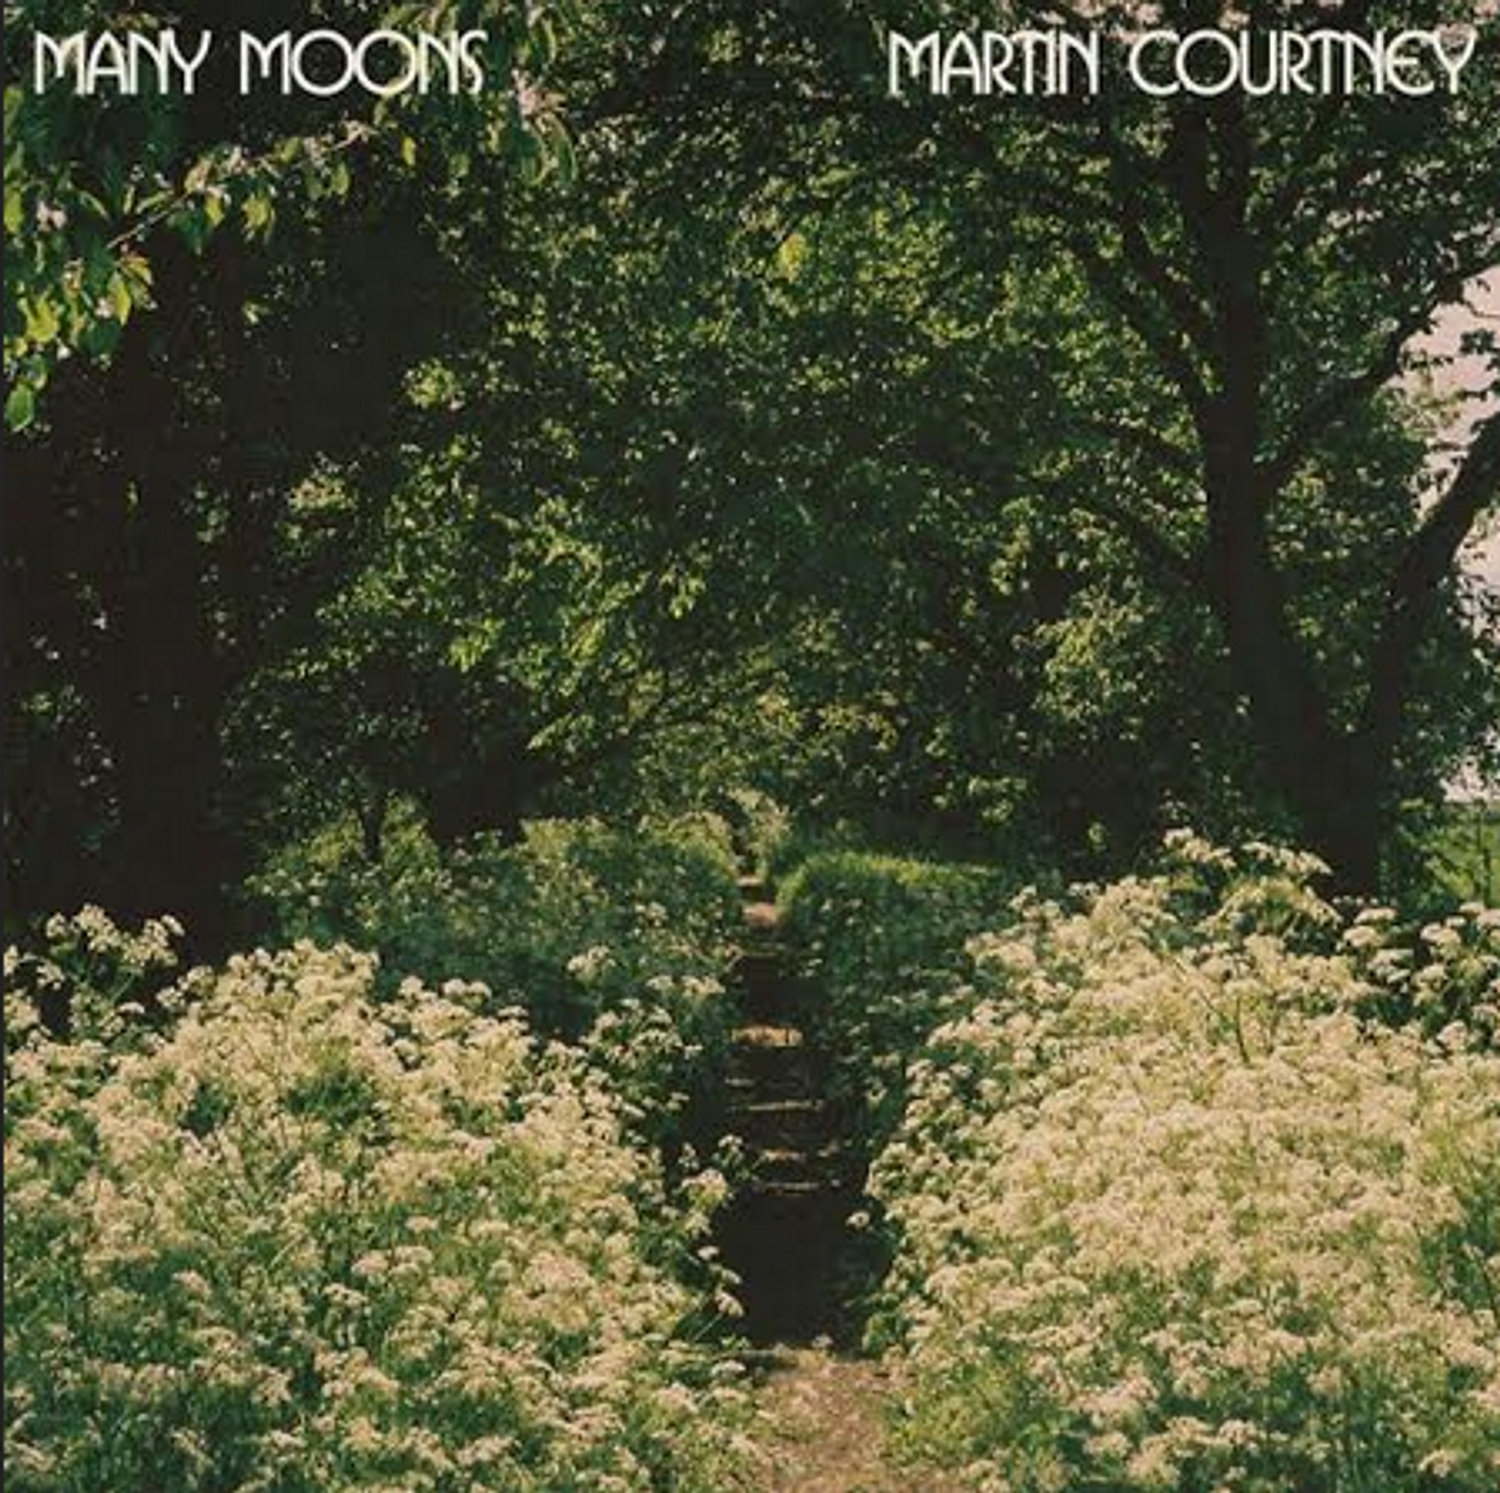 Real Estate’s Martin Courtney announces ‘Many Moons’ album, airs ‘Northern Highway’ video